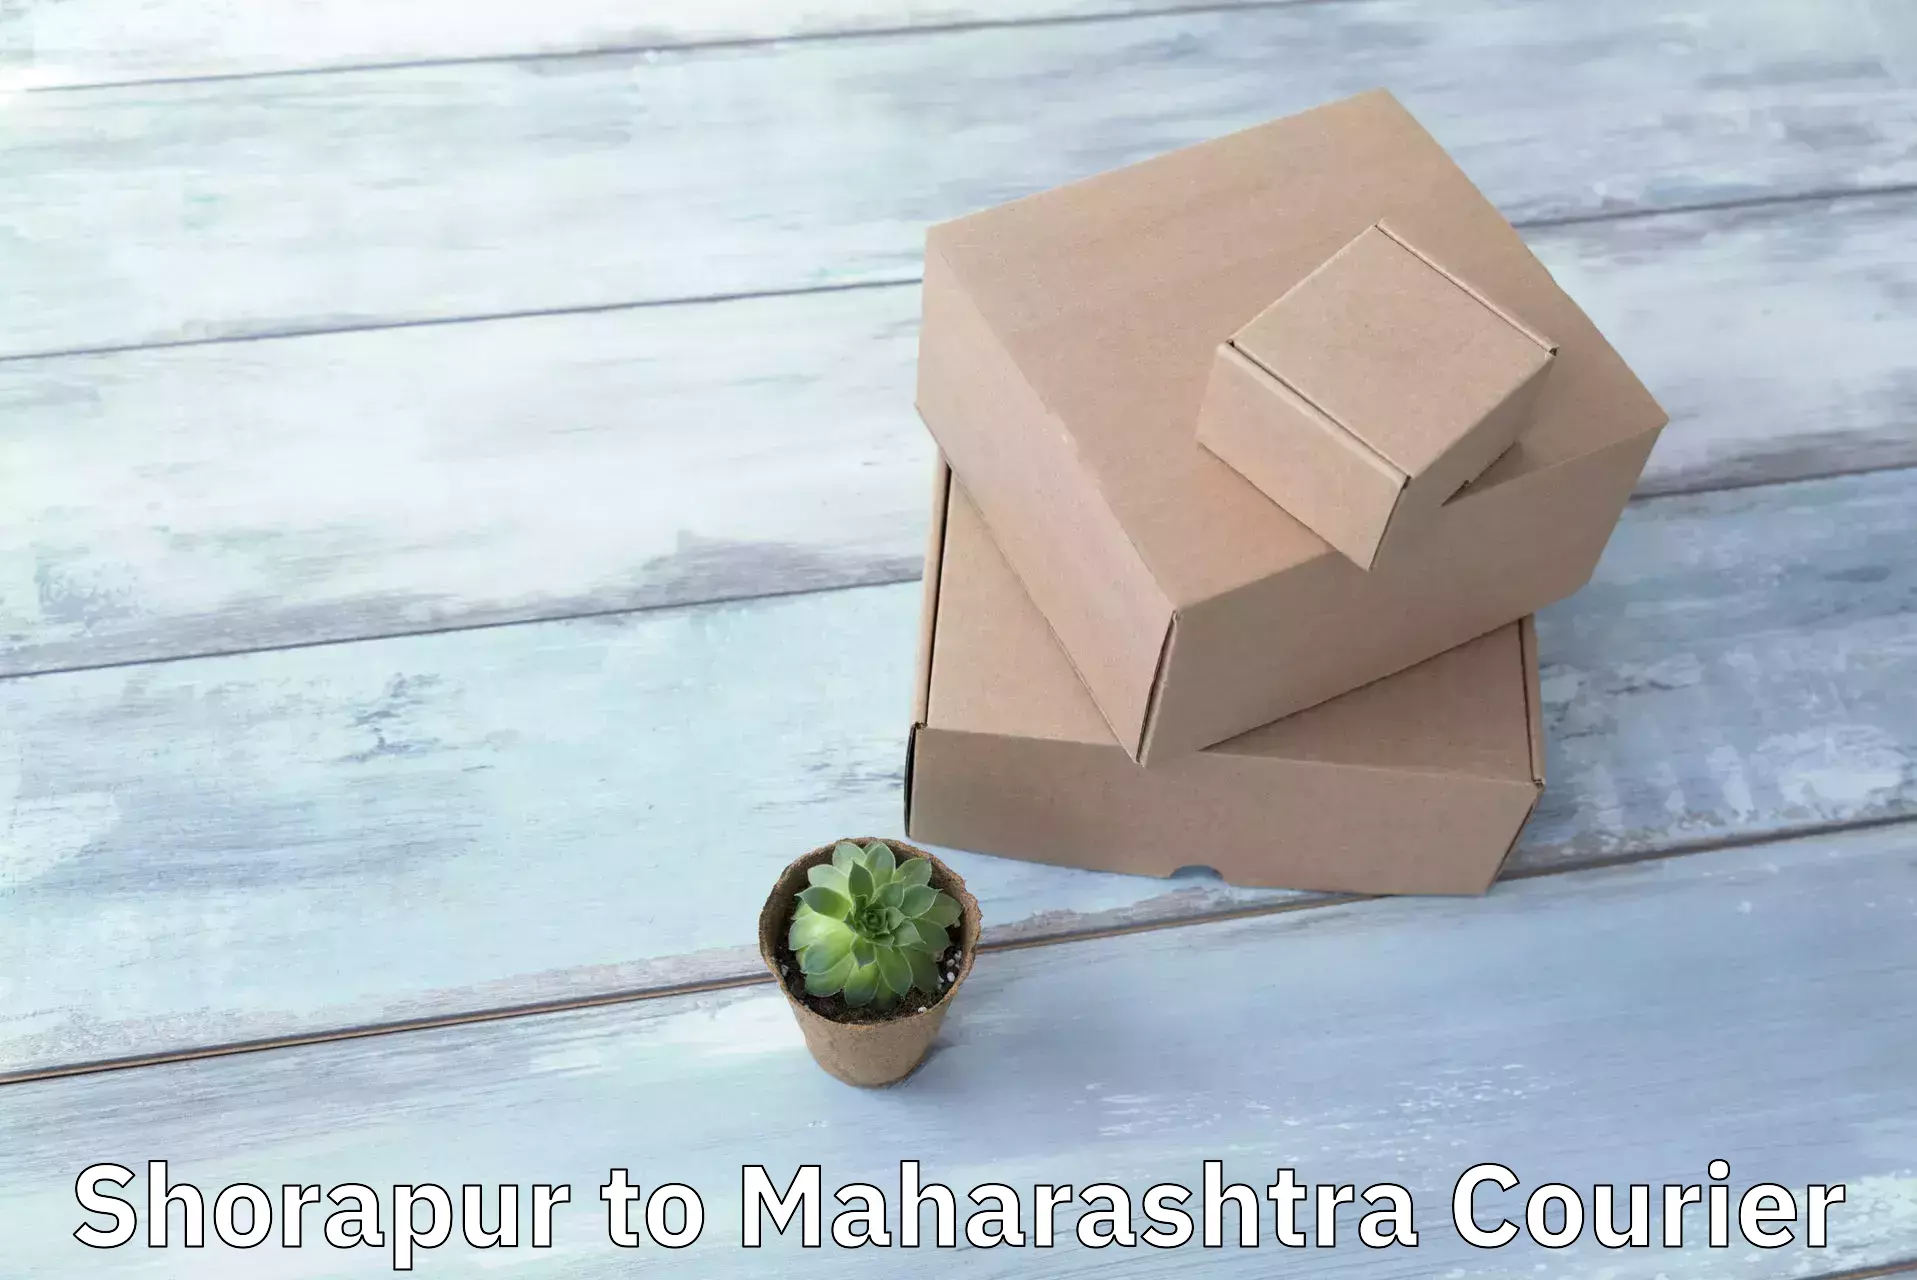 Next-day delivery options Shorapur to Mhaswad